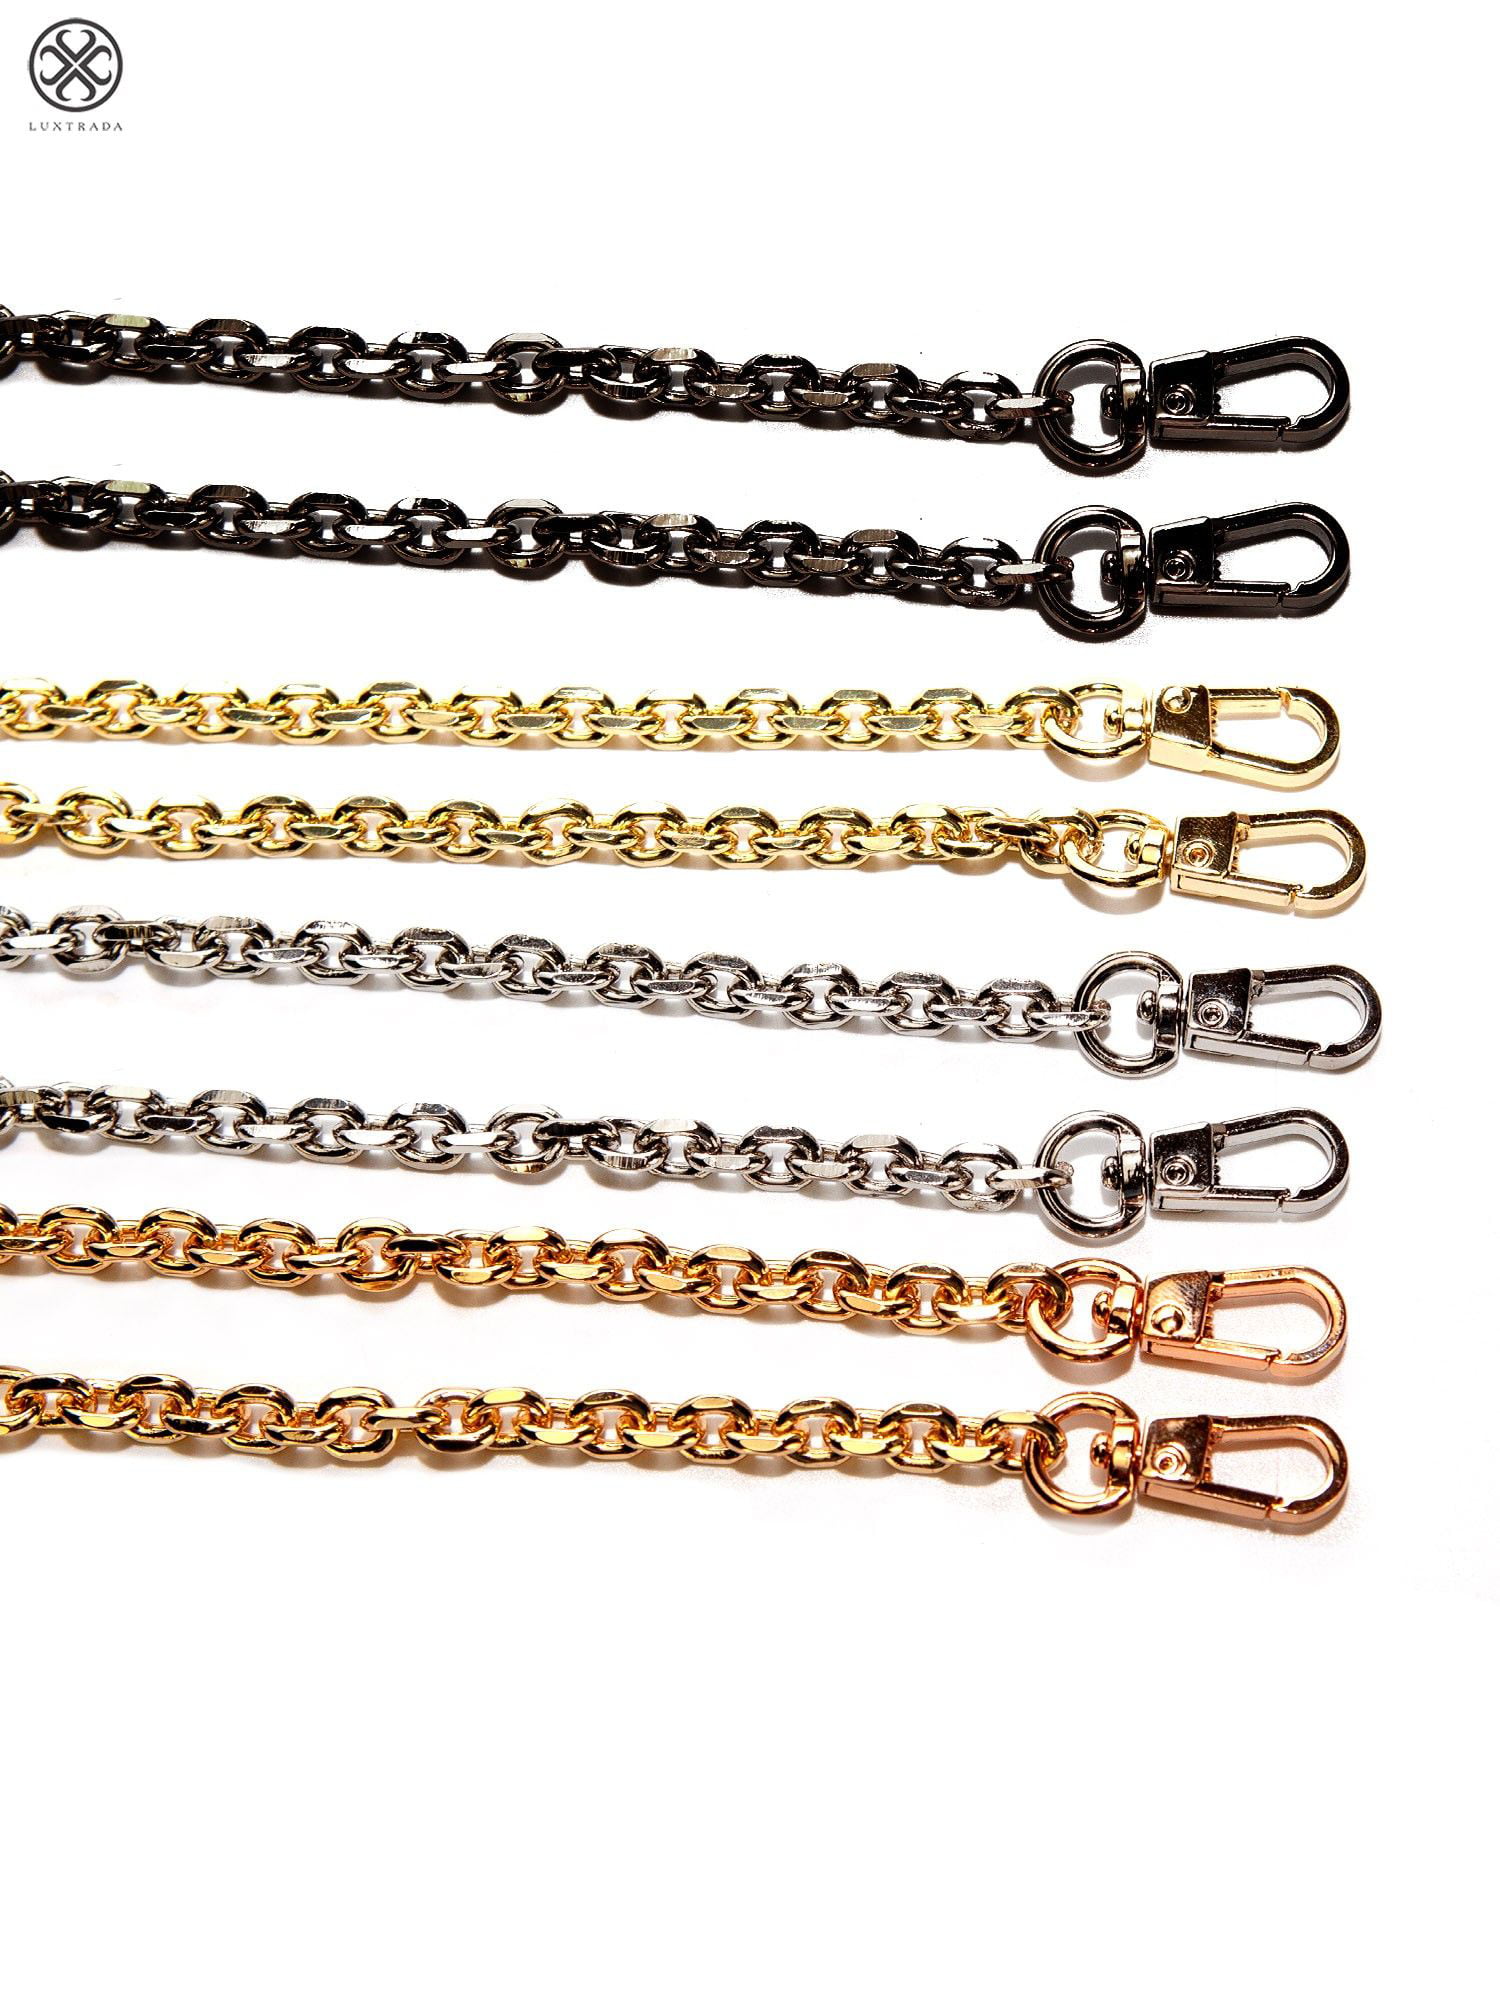  47 Adjustable Purse Strap Replacement with Buckles, Synthetic Leather  Chain Strap Bag Chain for Purse, Bag Strap Crossbody for Shoulder Cross Body  Sling Purse Handbag (Black Leather Gold Hardware) : Clothing